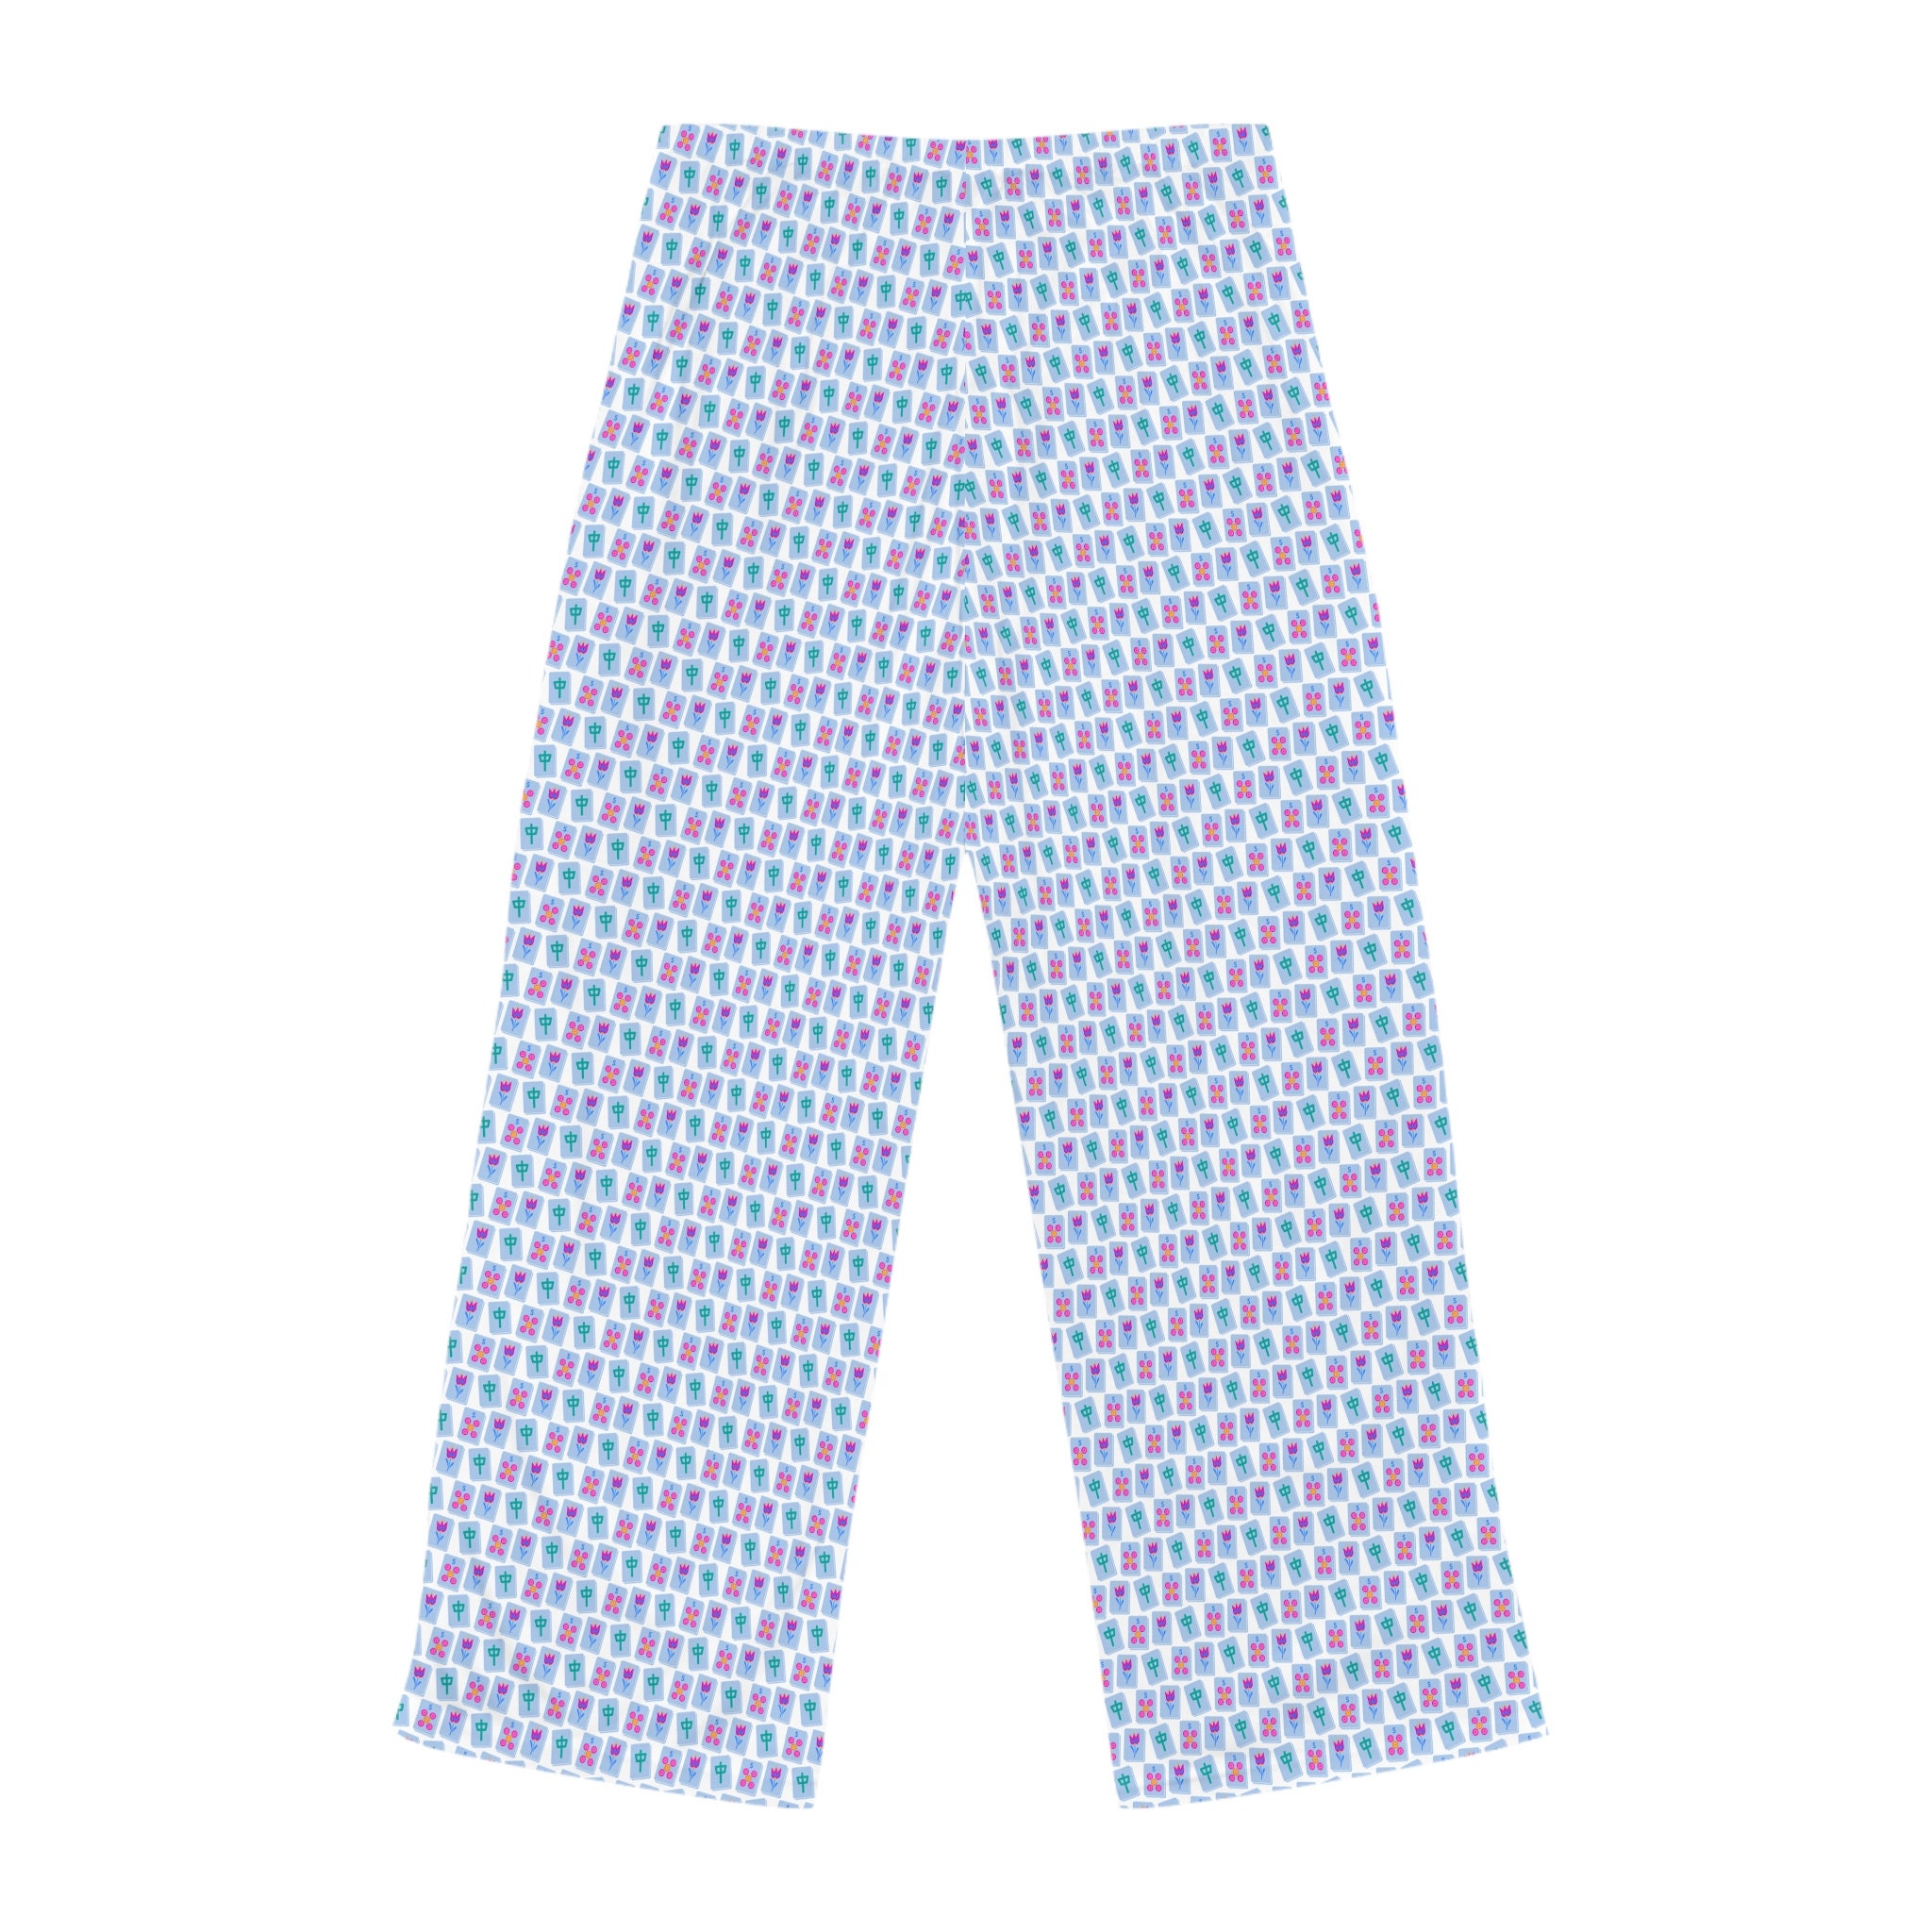 Mahjong Pattern Pajama Pants Colorful Tiles on Relaxed Fit Sleepwear ...